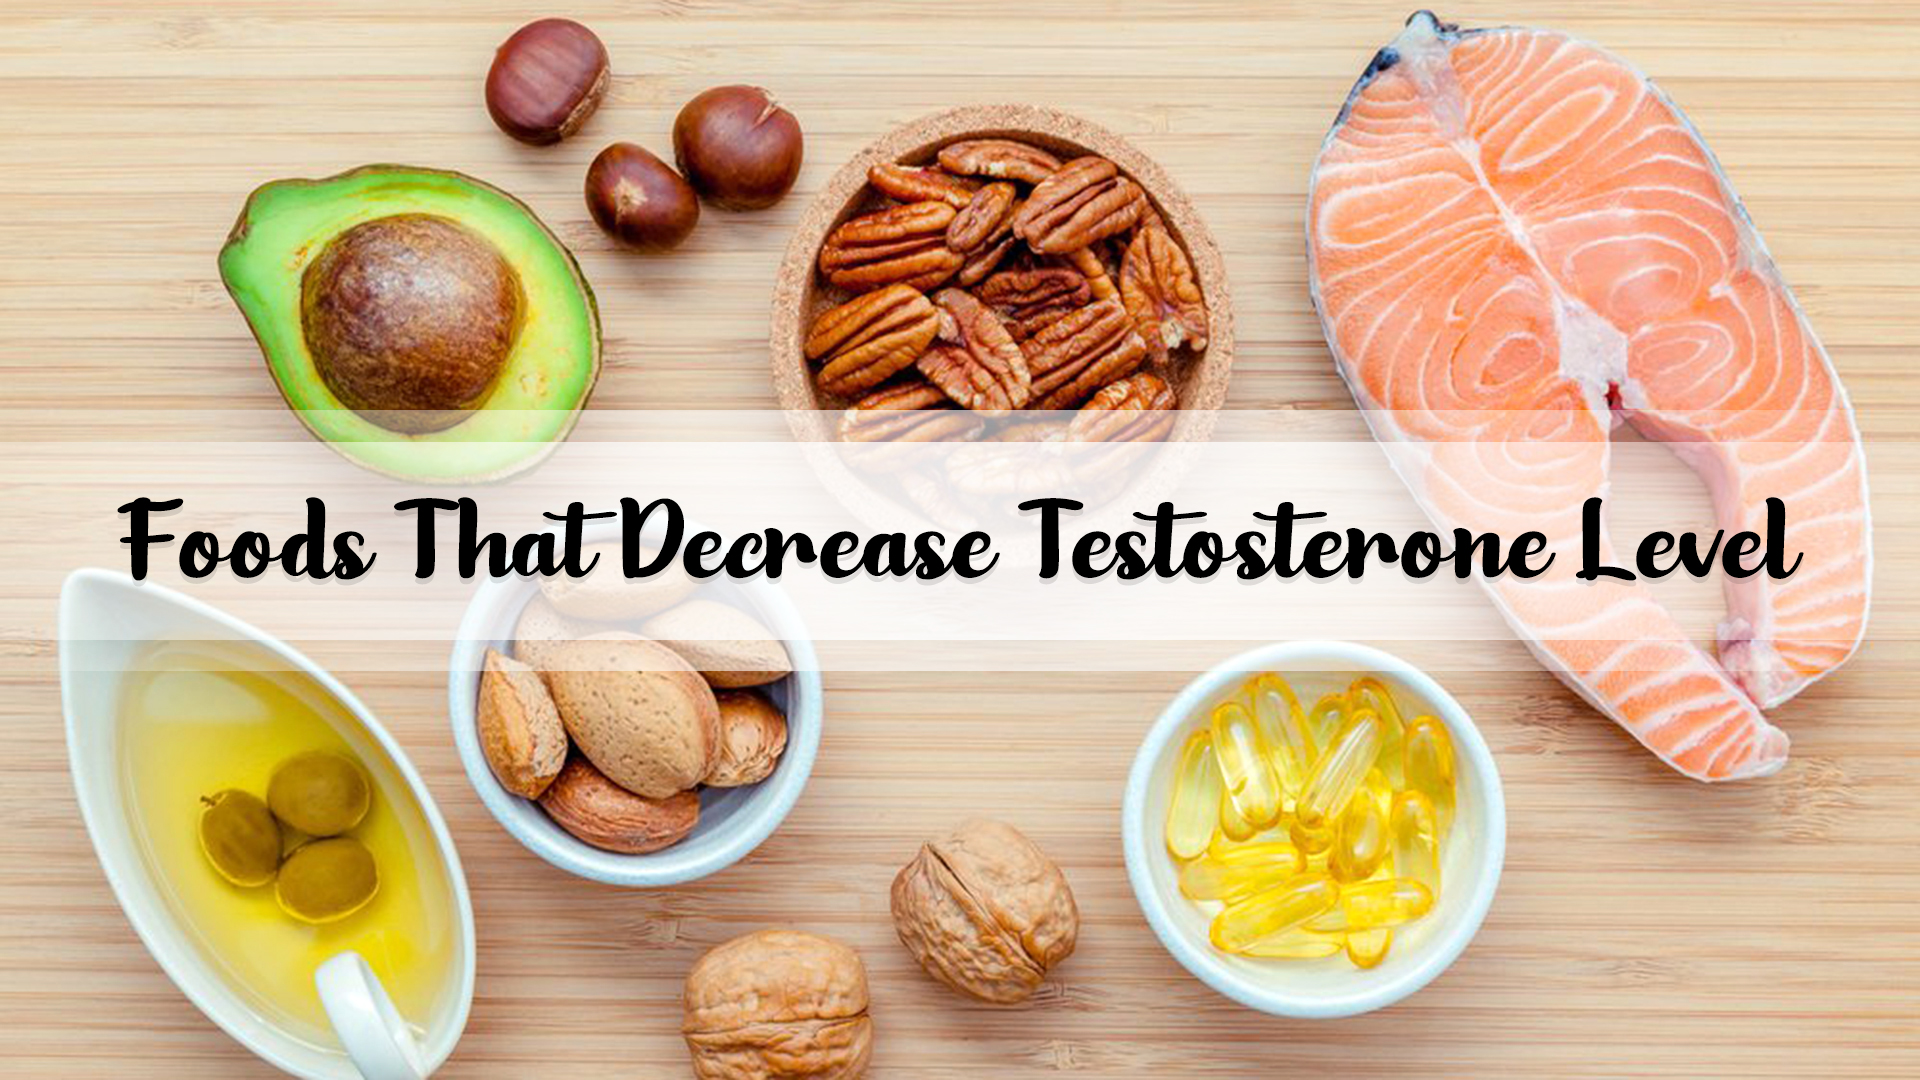 What are the foods that kill testosterone